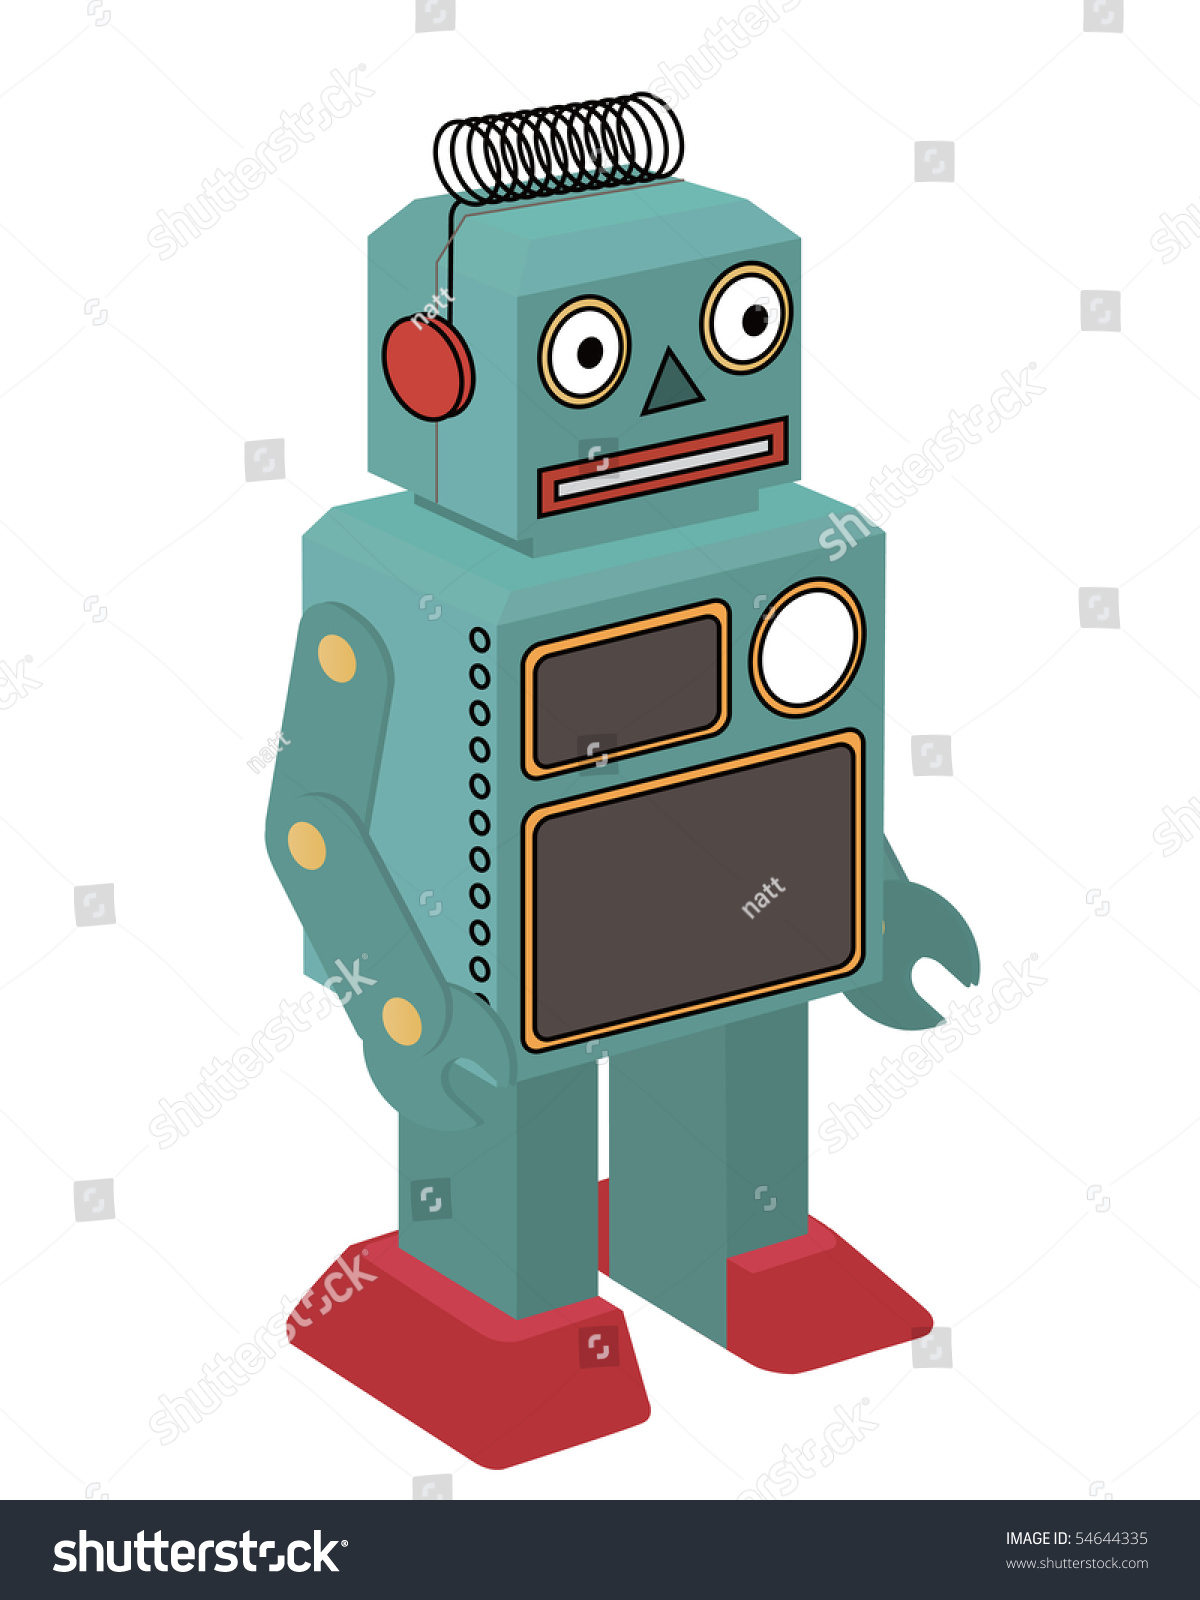 toy robot clipart - photo #27